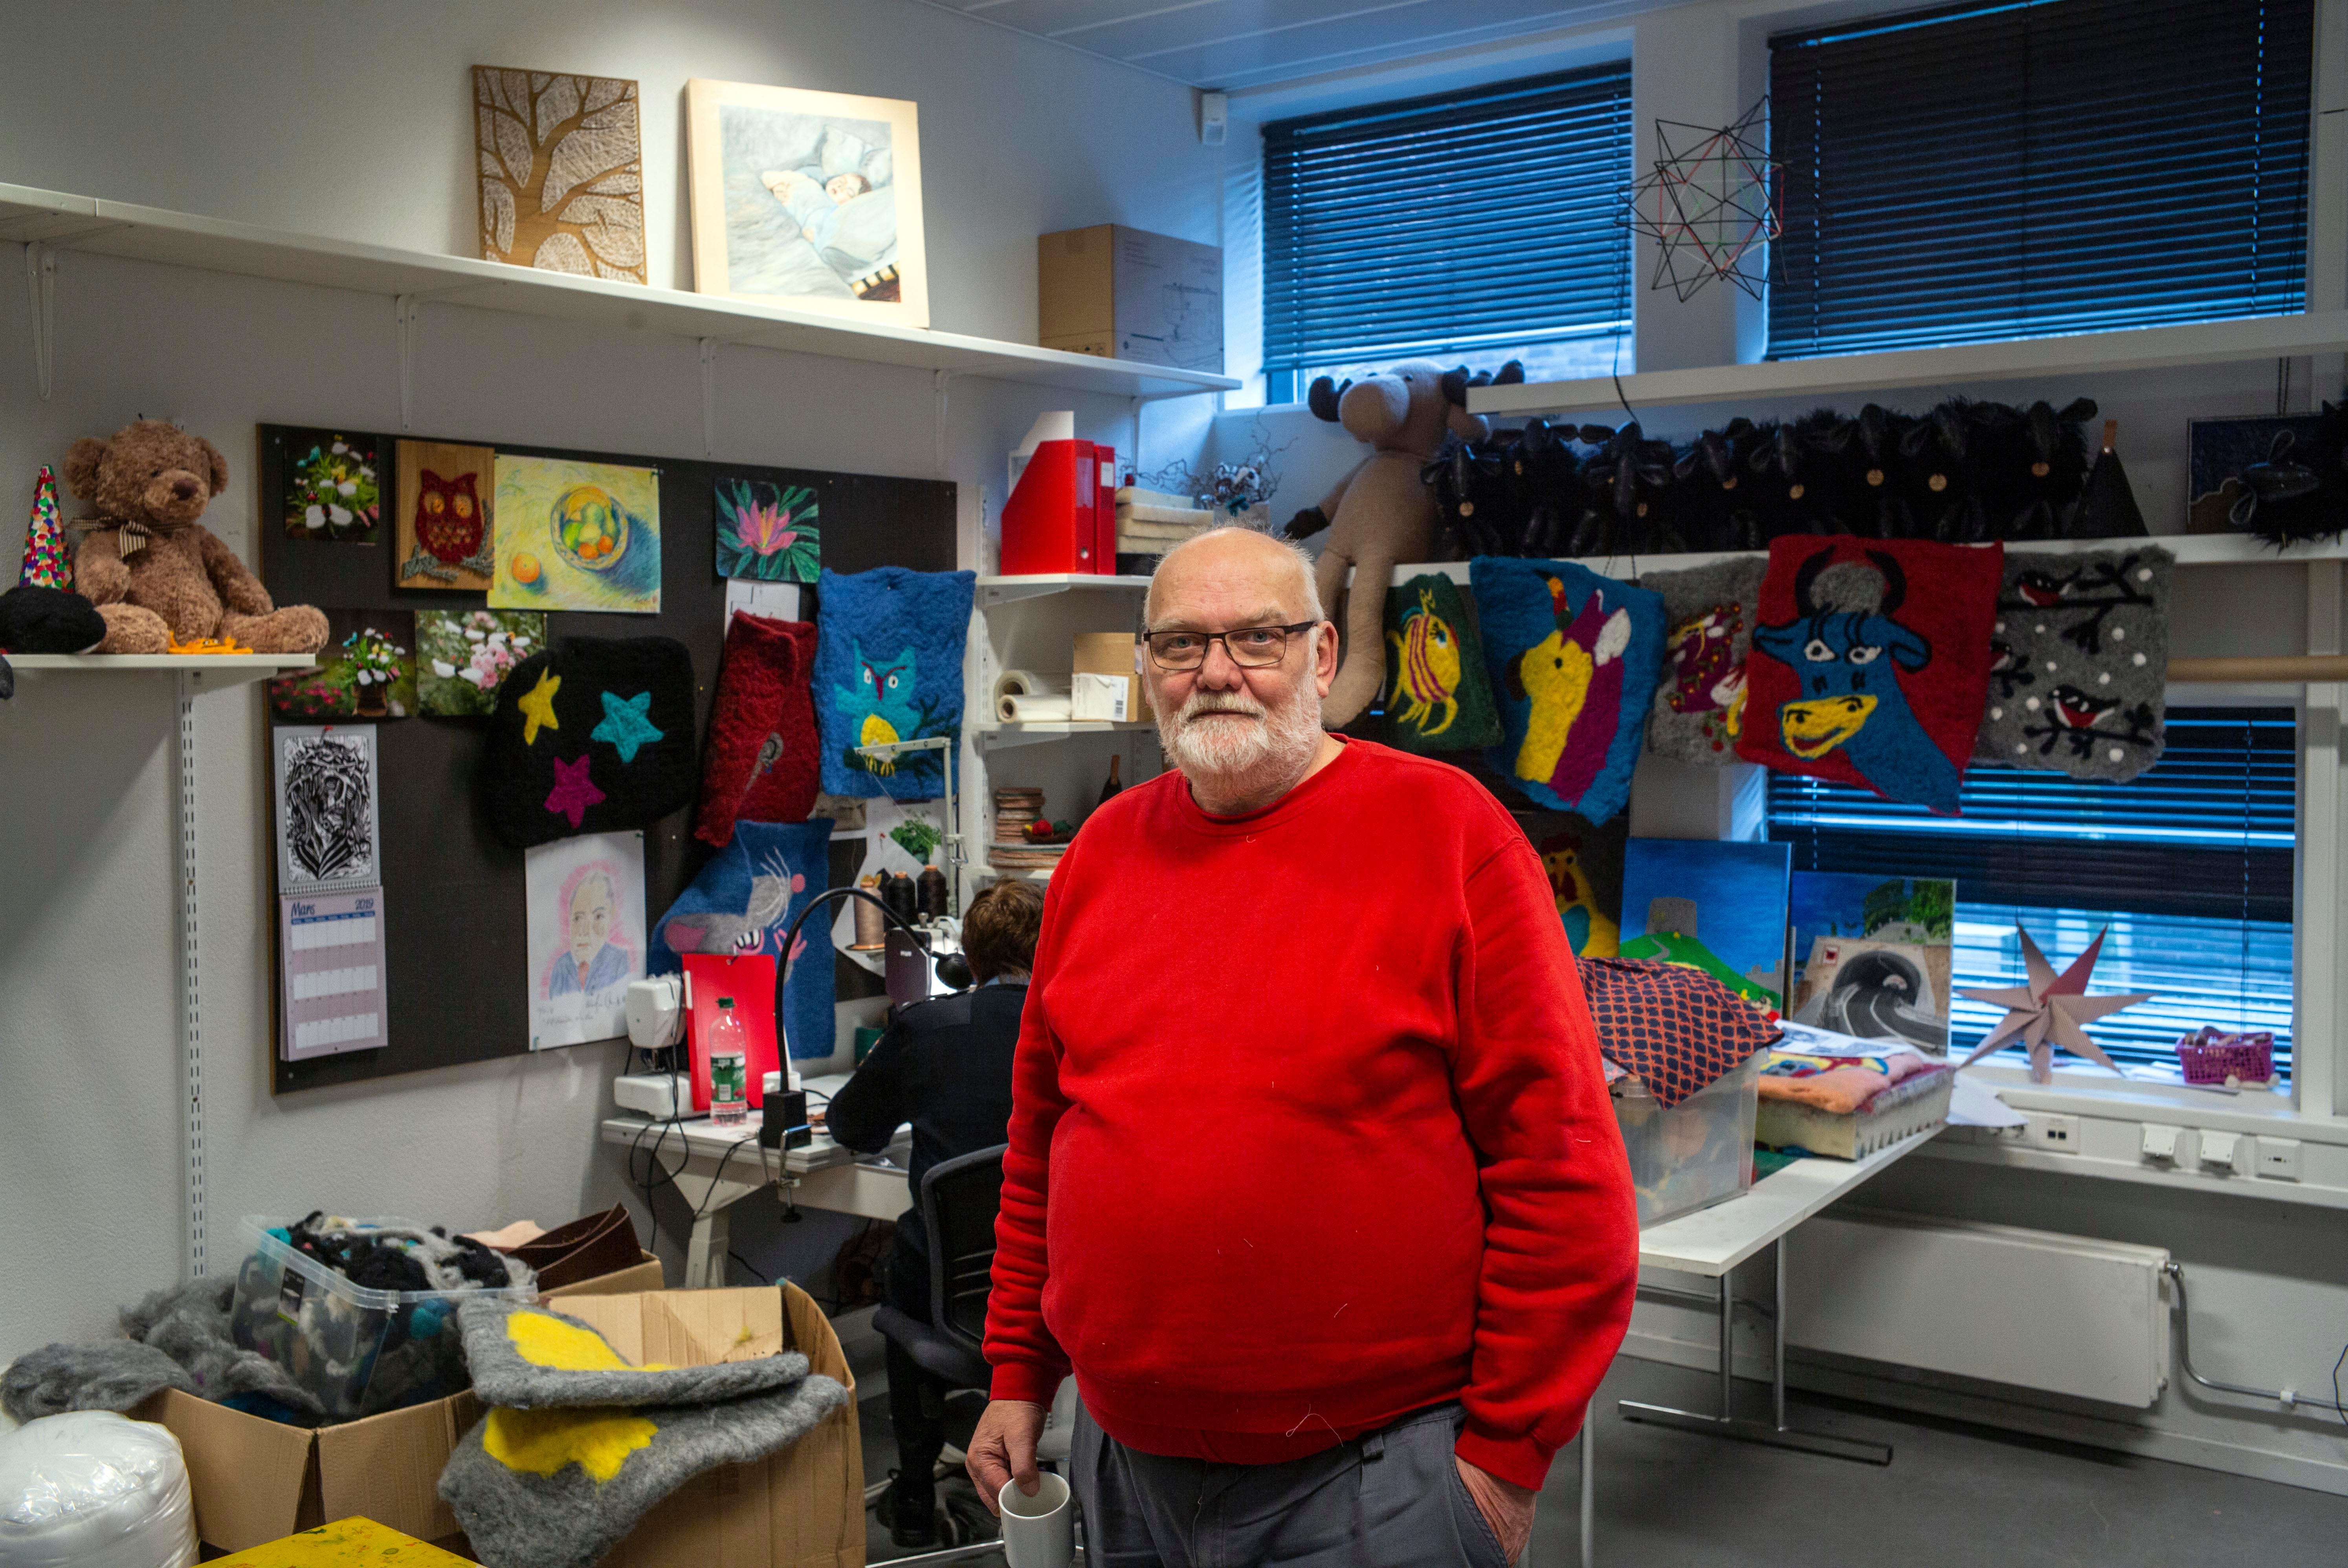 John Anders Braathen, 65, works in a textiles shop at Halden Prison in Norway. Products produced in the prison's textiles studio, print shop, art studios, wood shop and other learning centers can be purchased online at haldenfengselprodukter.no, a website produced by prisoners.